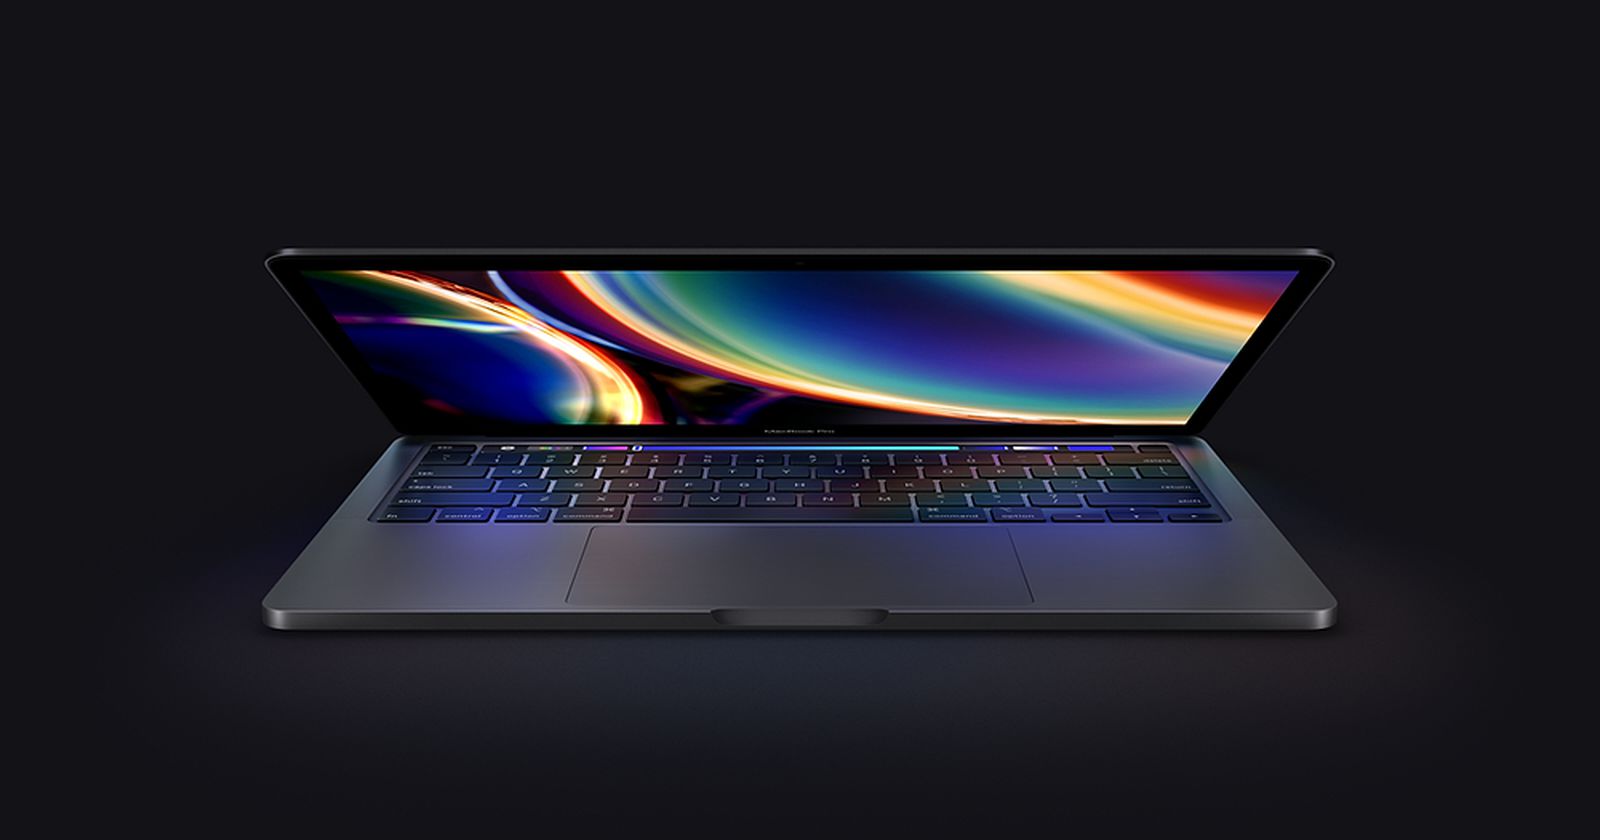 DigiTimes: Apple to introduce MacBook Pro laptop with M2 chip next month